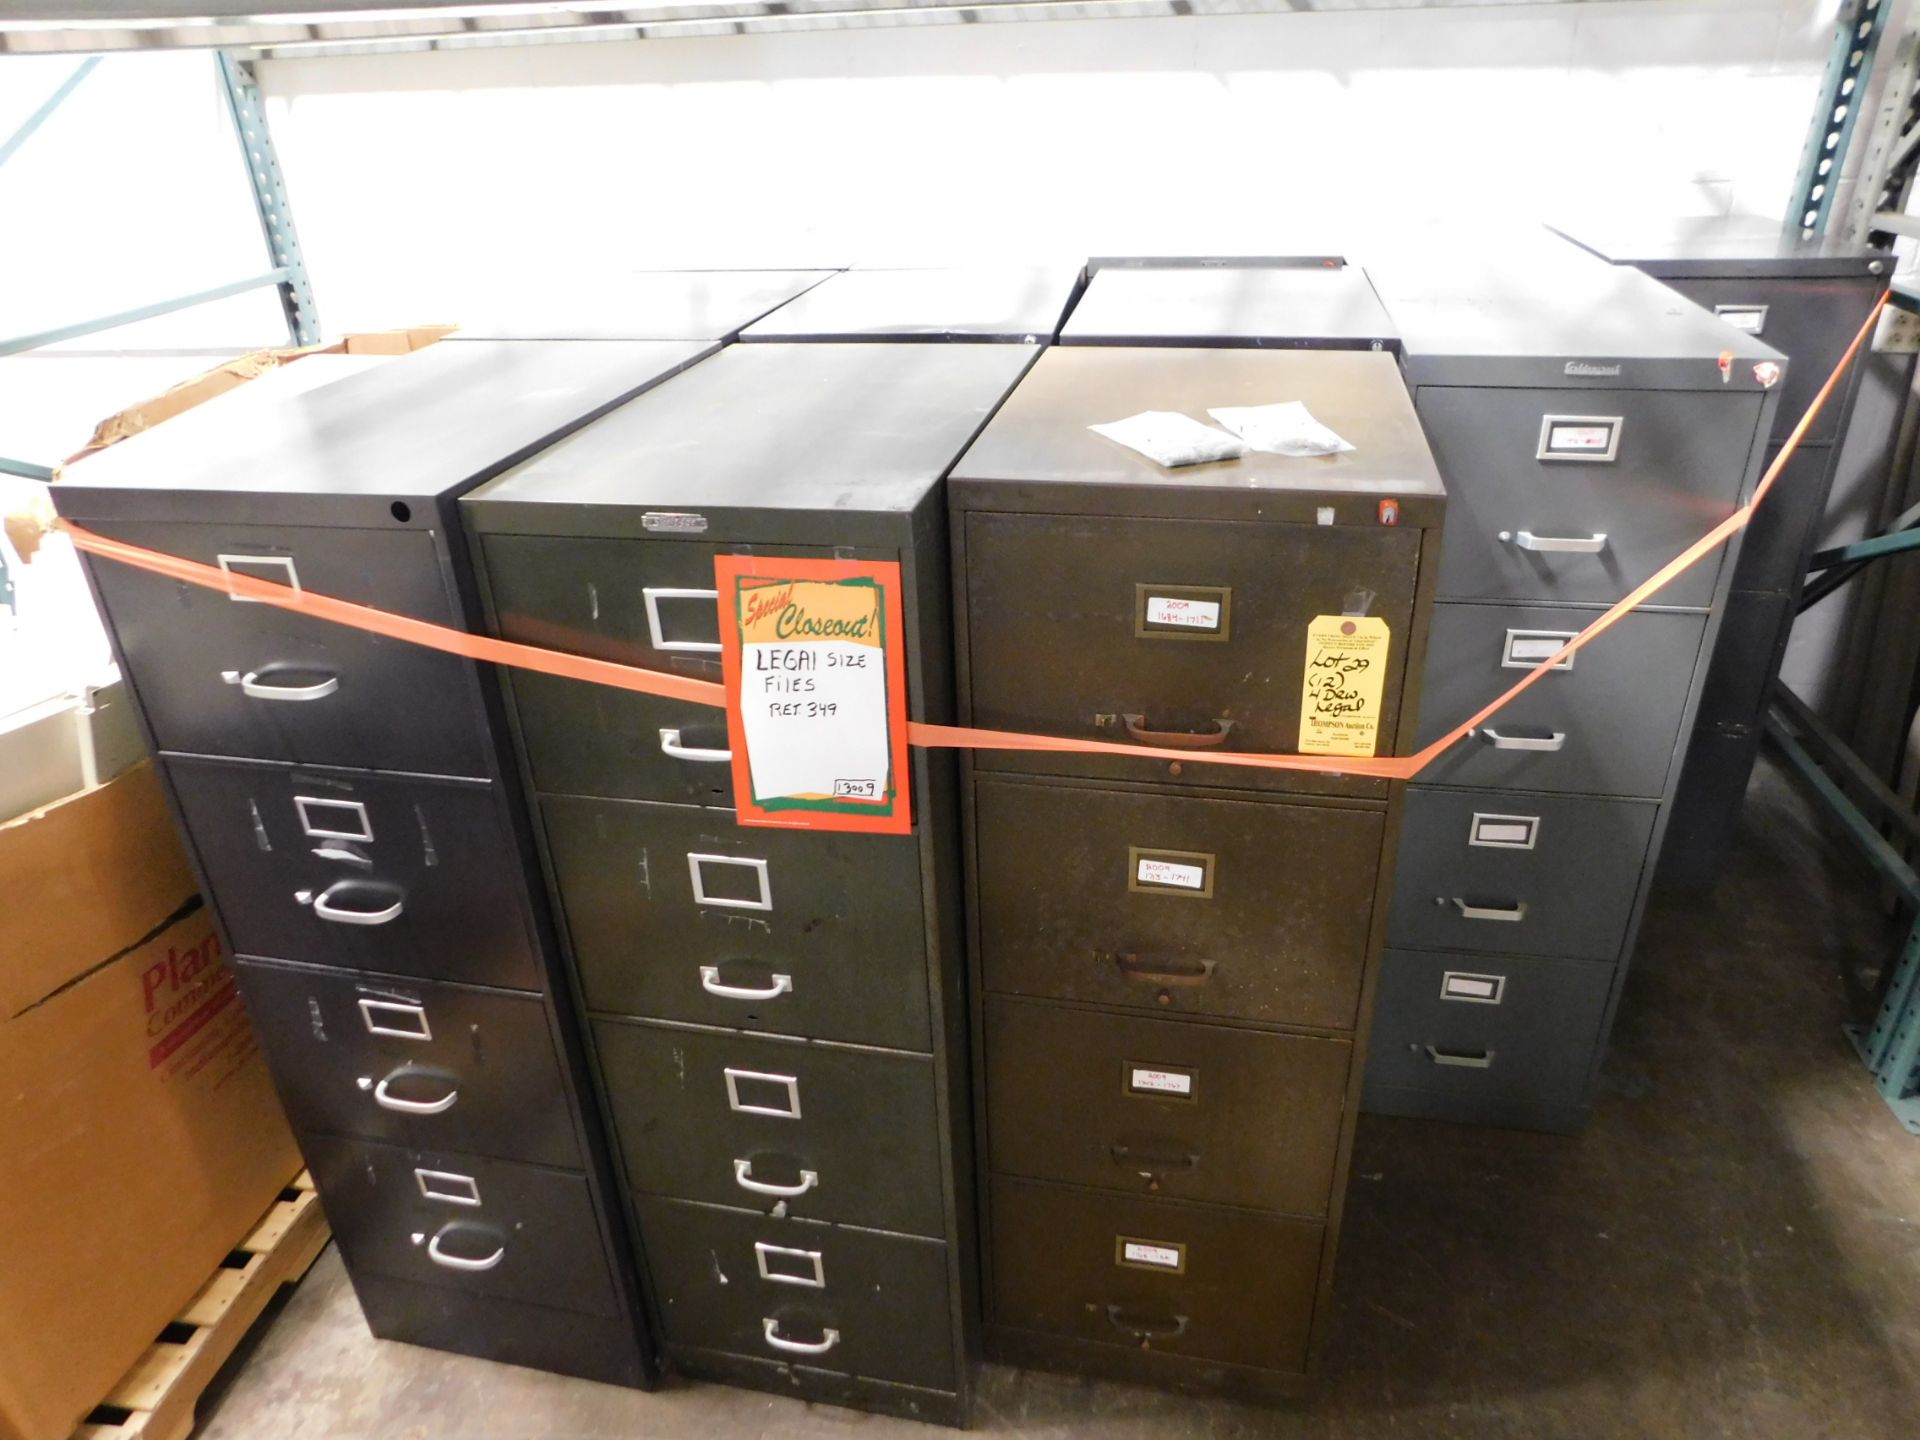 (12) 4-Drawer Legal File Cabinets